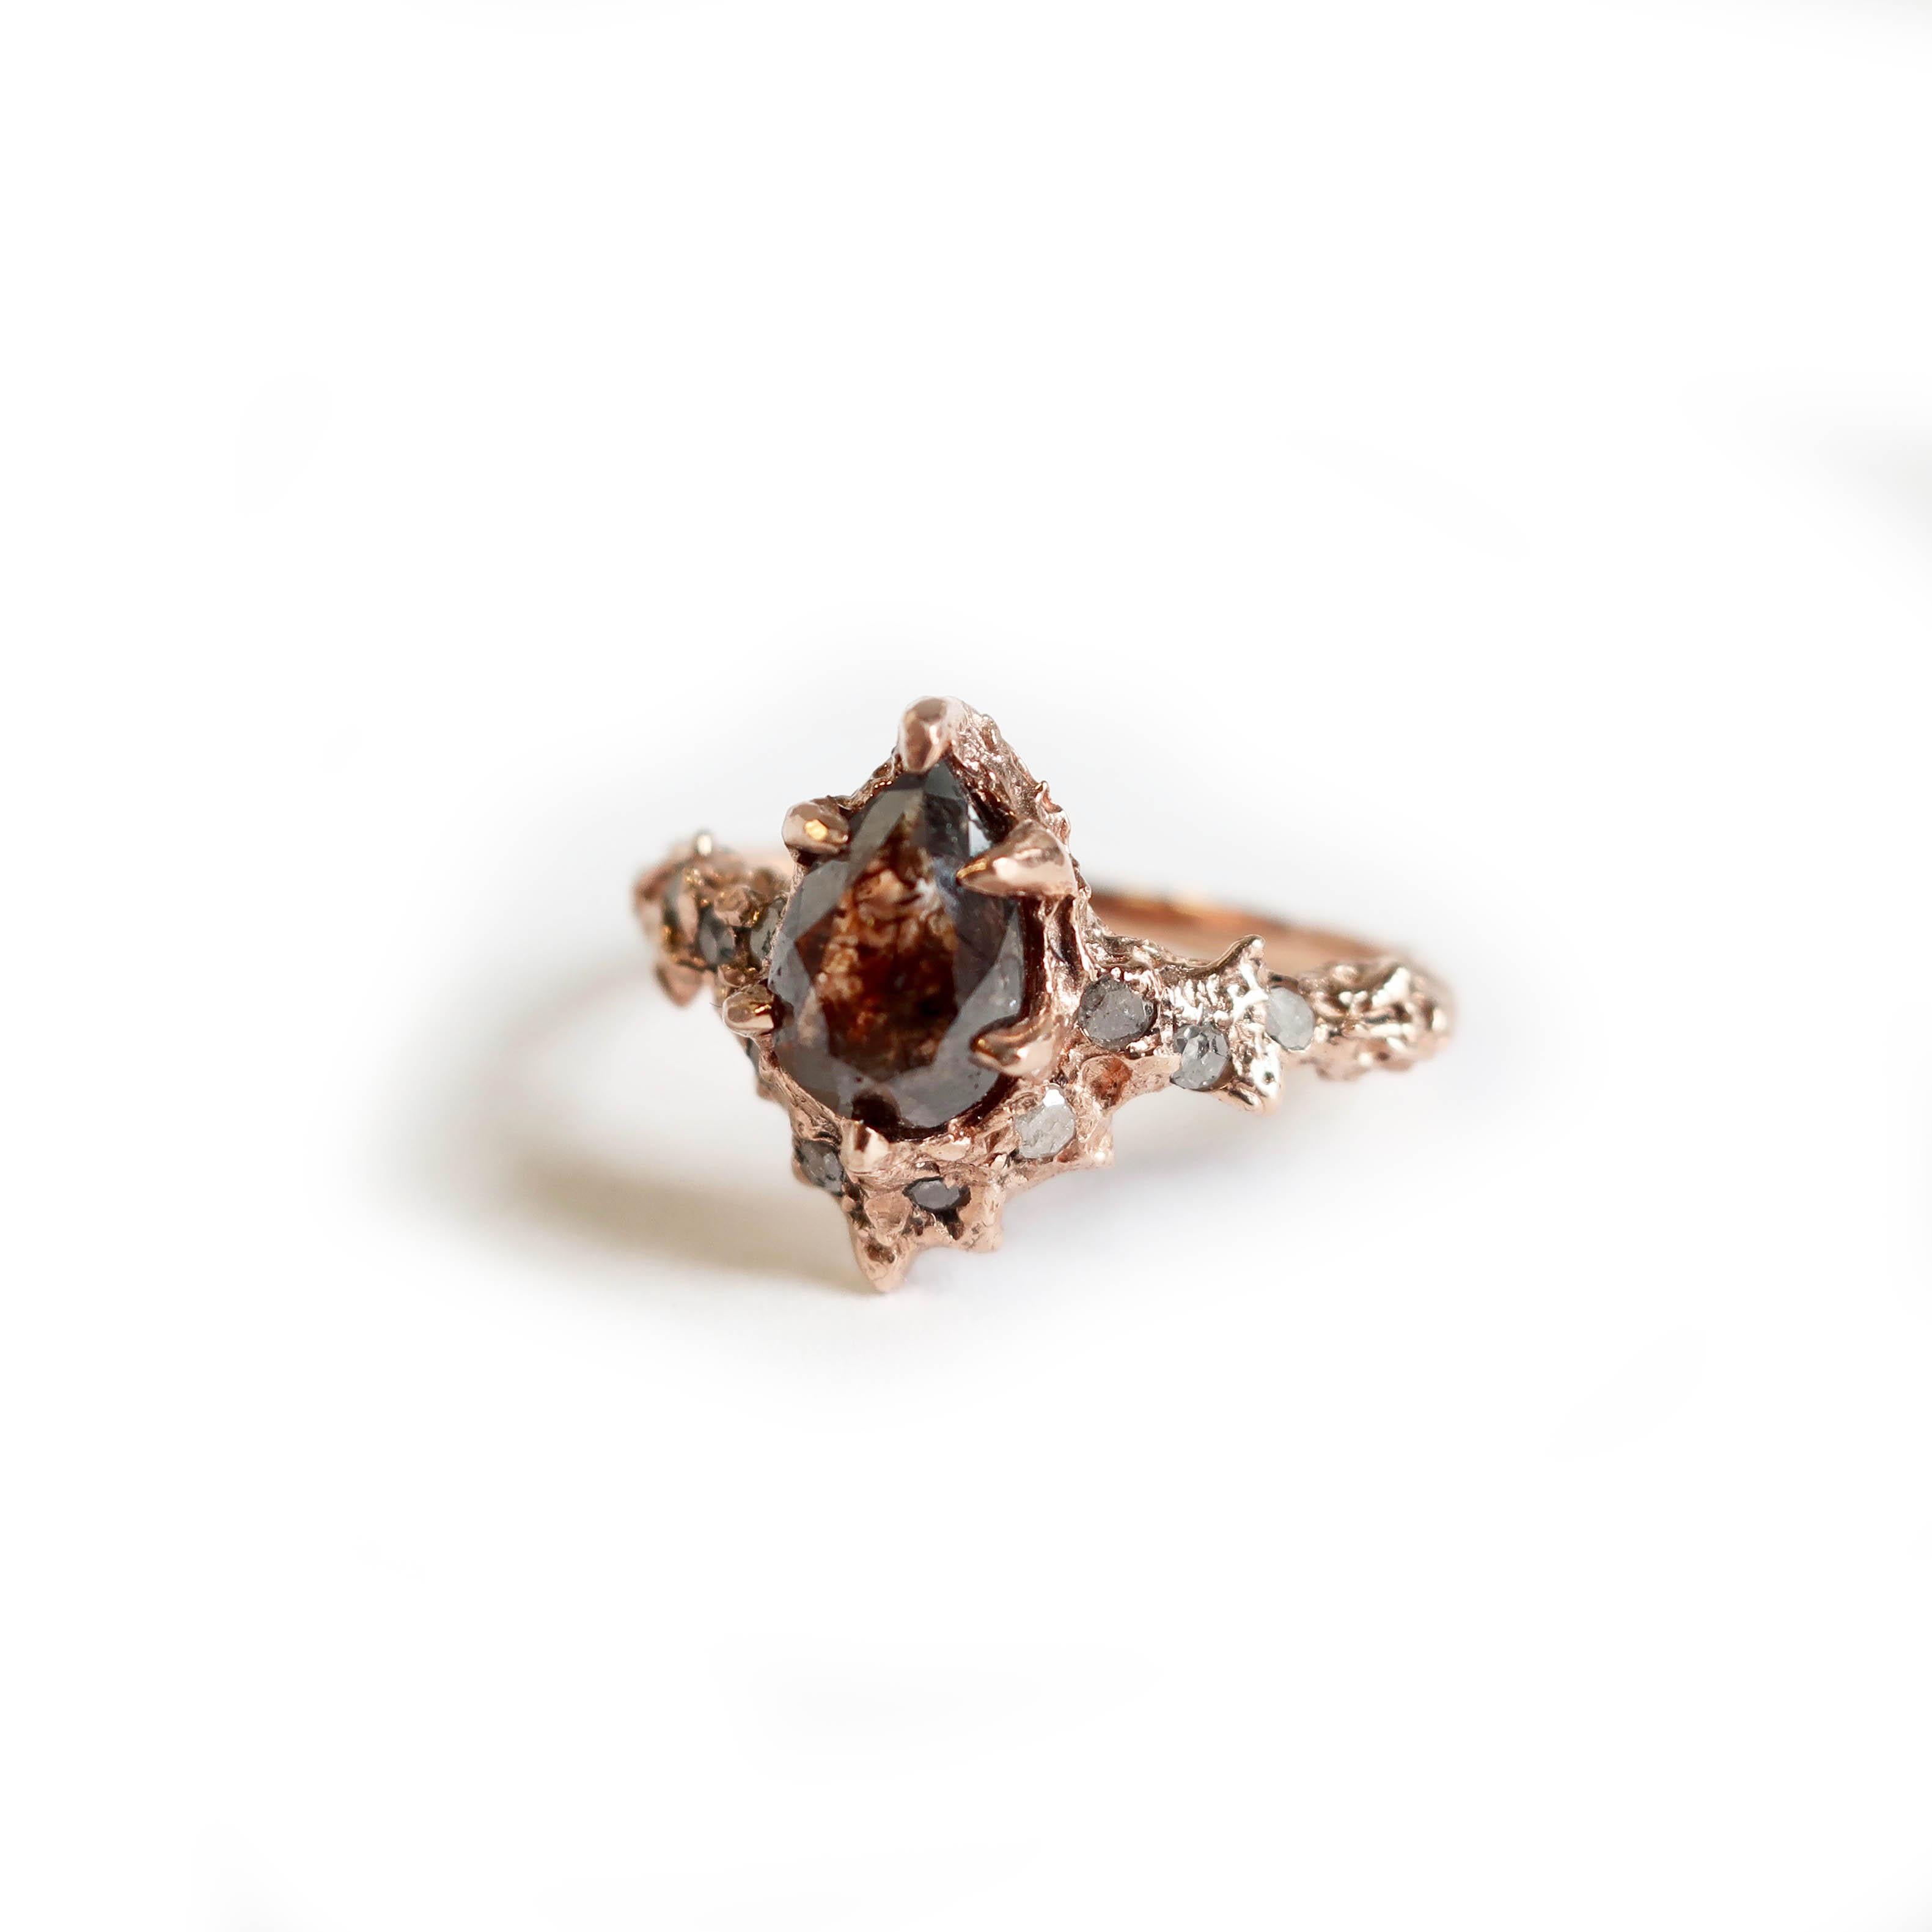 A brown rose cut diamond encased in 14k rose gold with 11 icy 1.5 mm side diamonds. 1.55 carat diamond with salt and pepper pave diamonds scattered throughout . This item can be customized with various stone and metal options.

Size 7.5

Natural